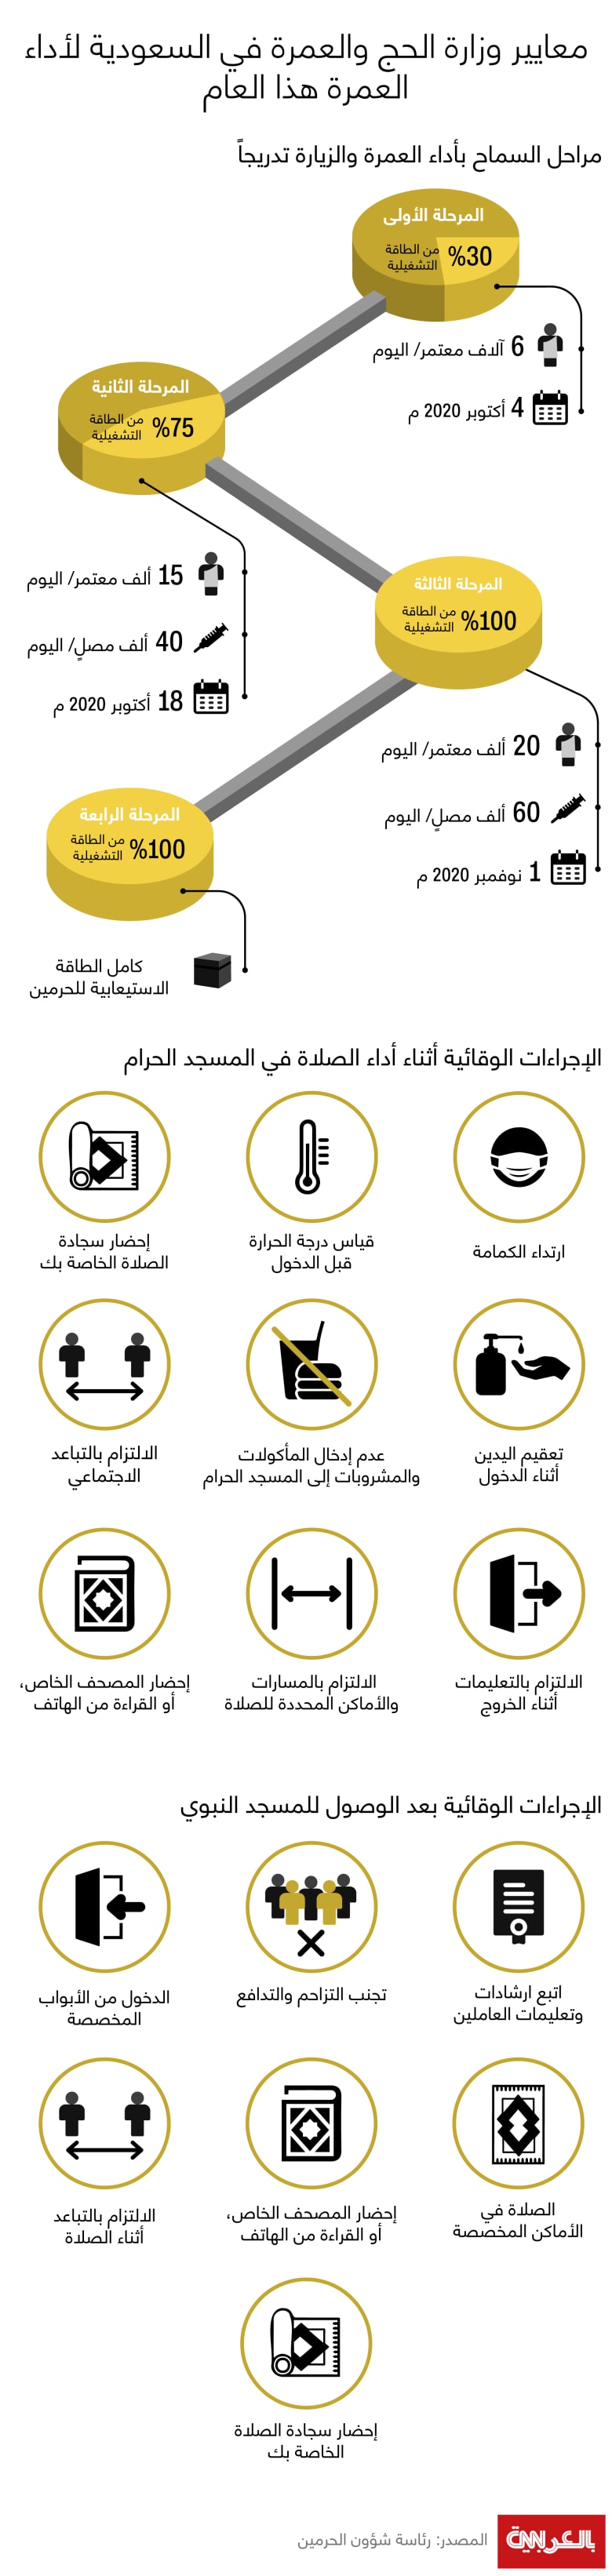 Back-to-Umrah-stages-precautions-2020